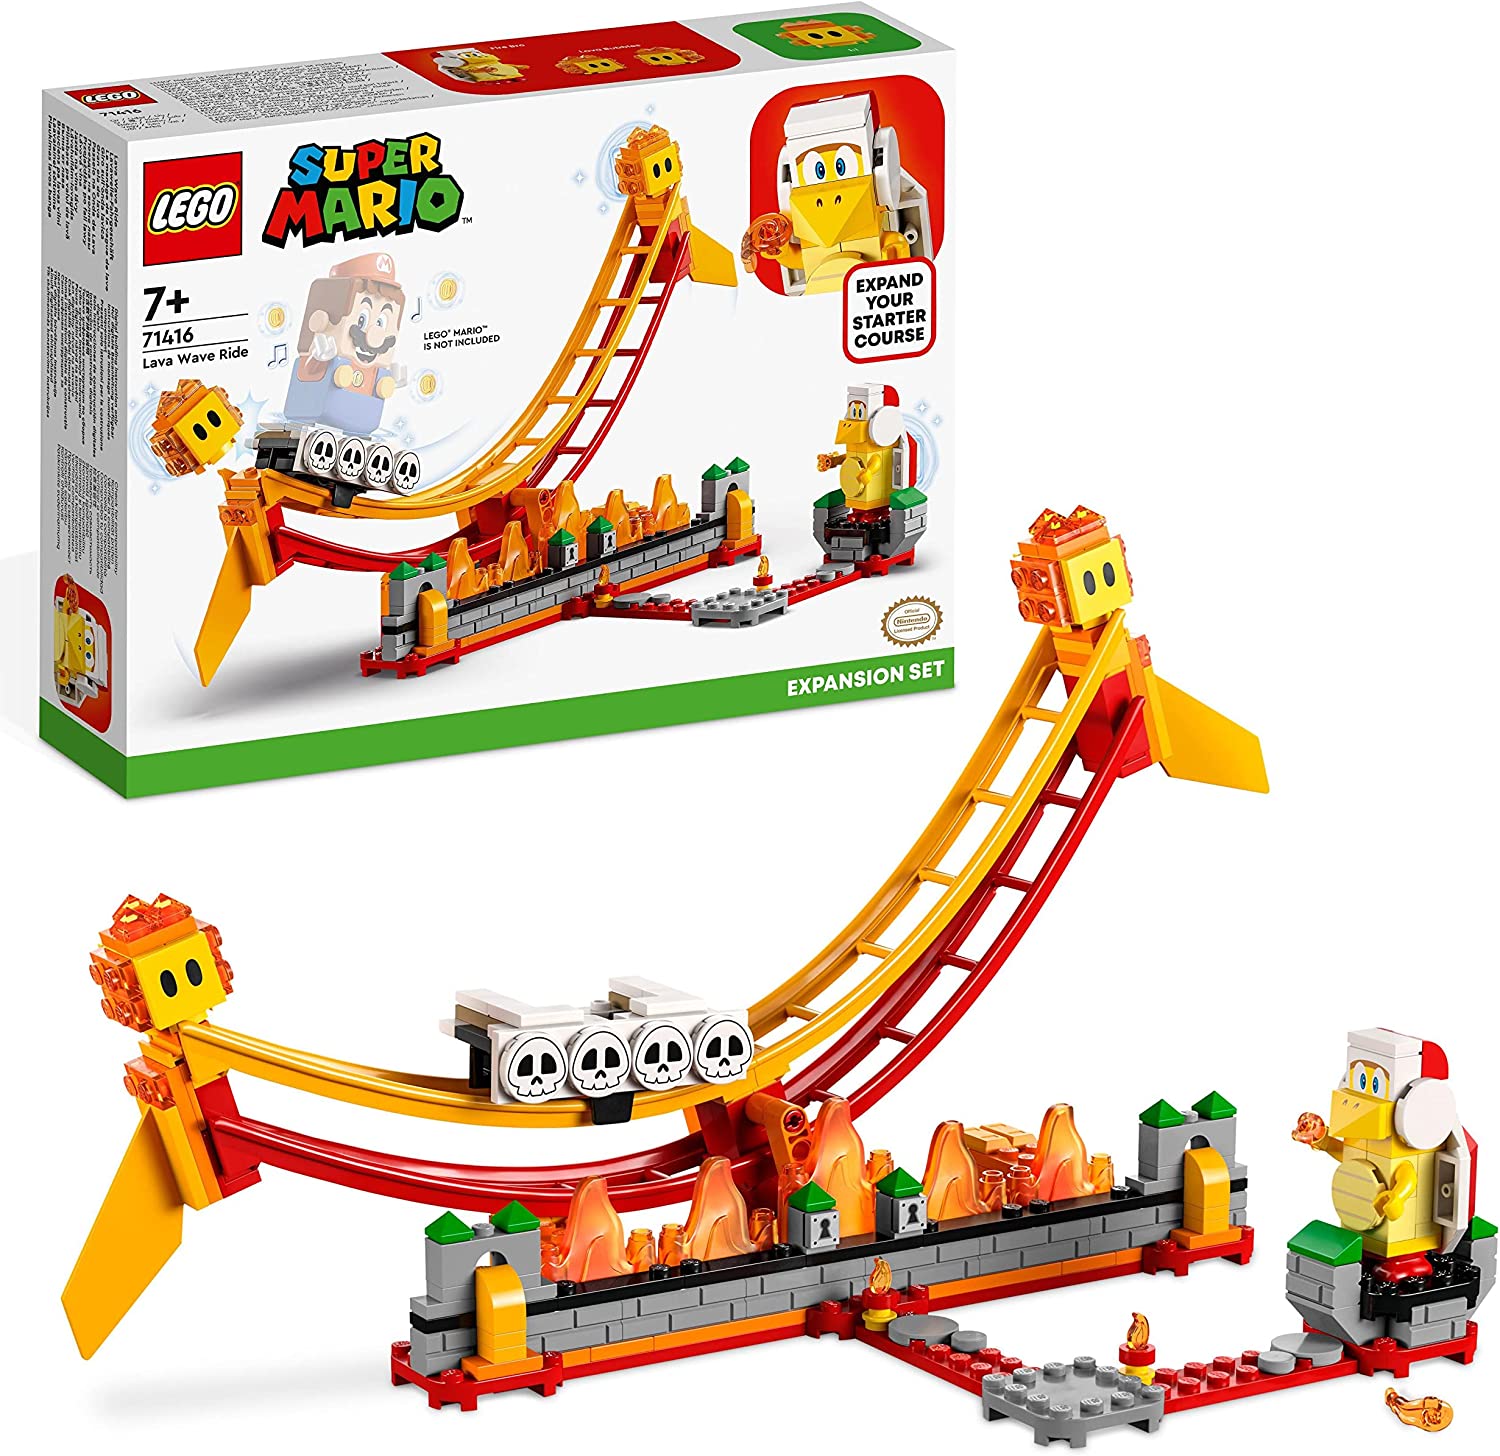 LEGO 71416 Super Mario Lava Wave Ride - Expansion Set with Fire Brother and 2 Hotheads to Combine with Starter Kit, Toy for Kids